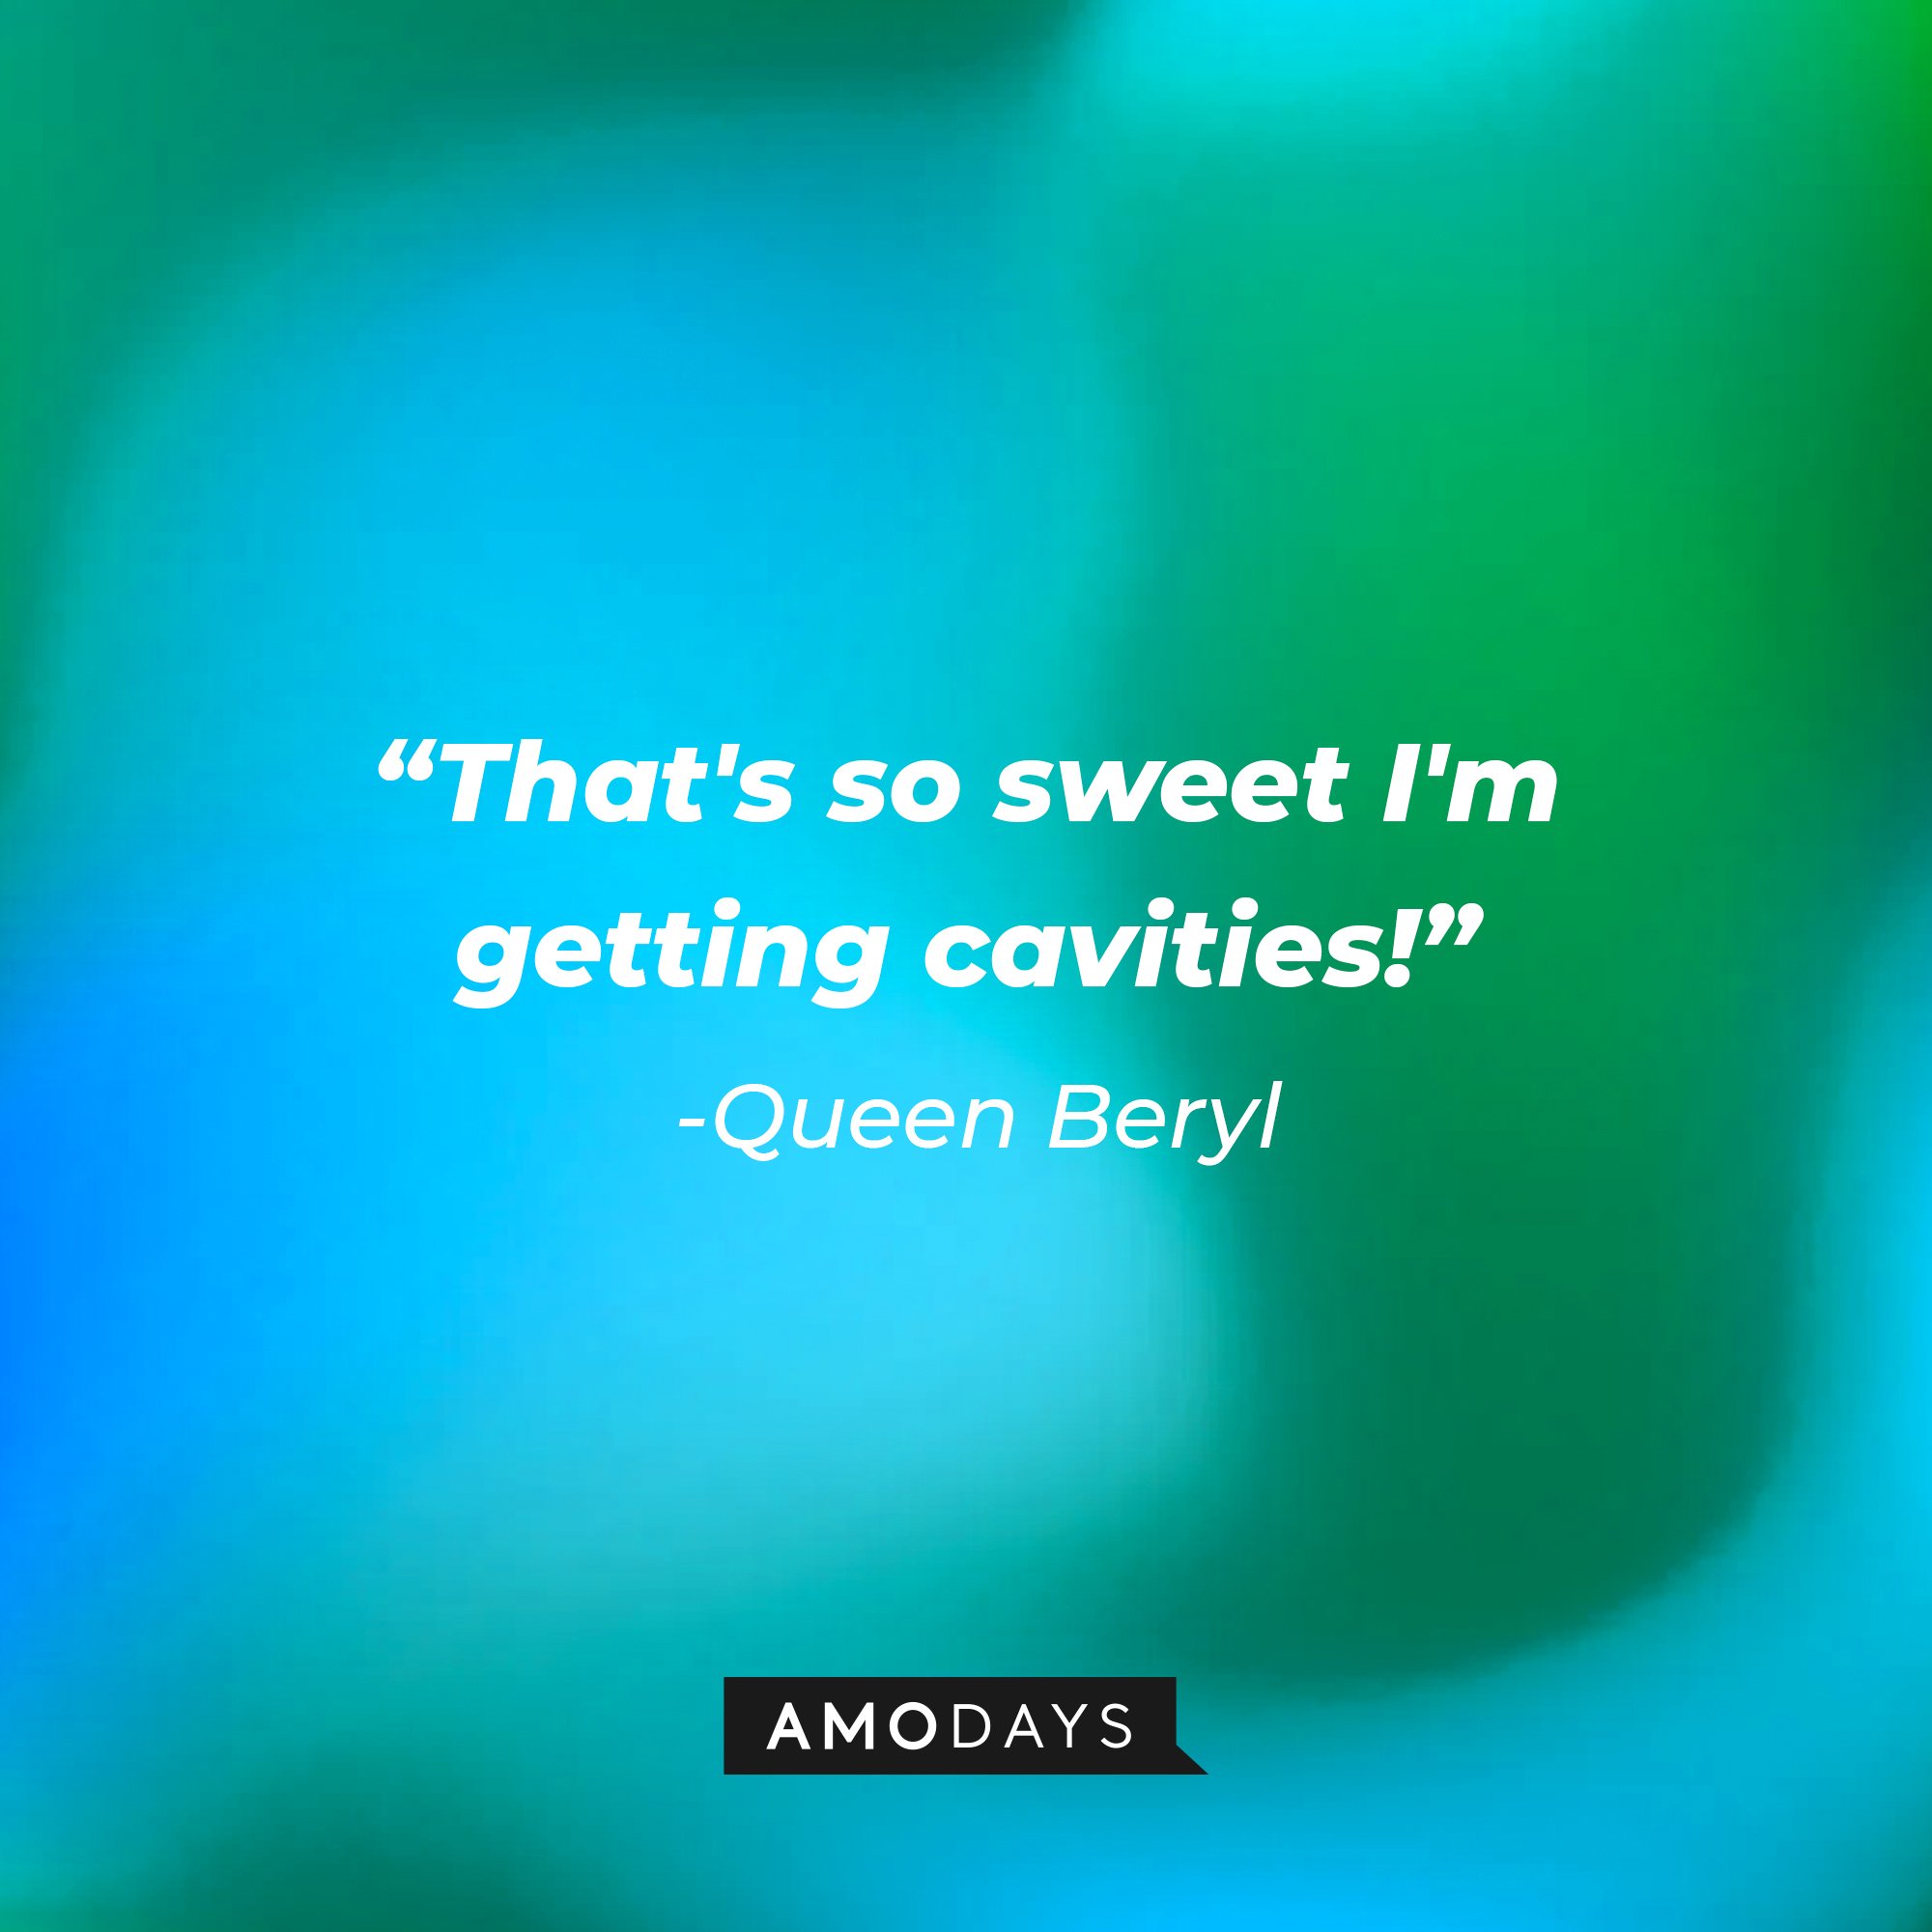 Queen Beryl’s quote: “That's so sweet I'm getting cavities!"  | Image: Amodays